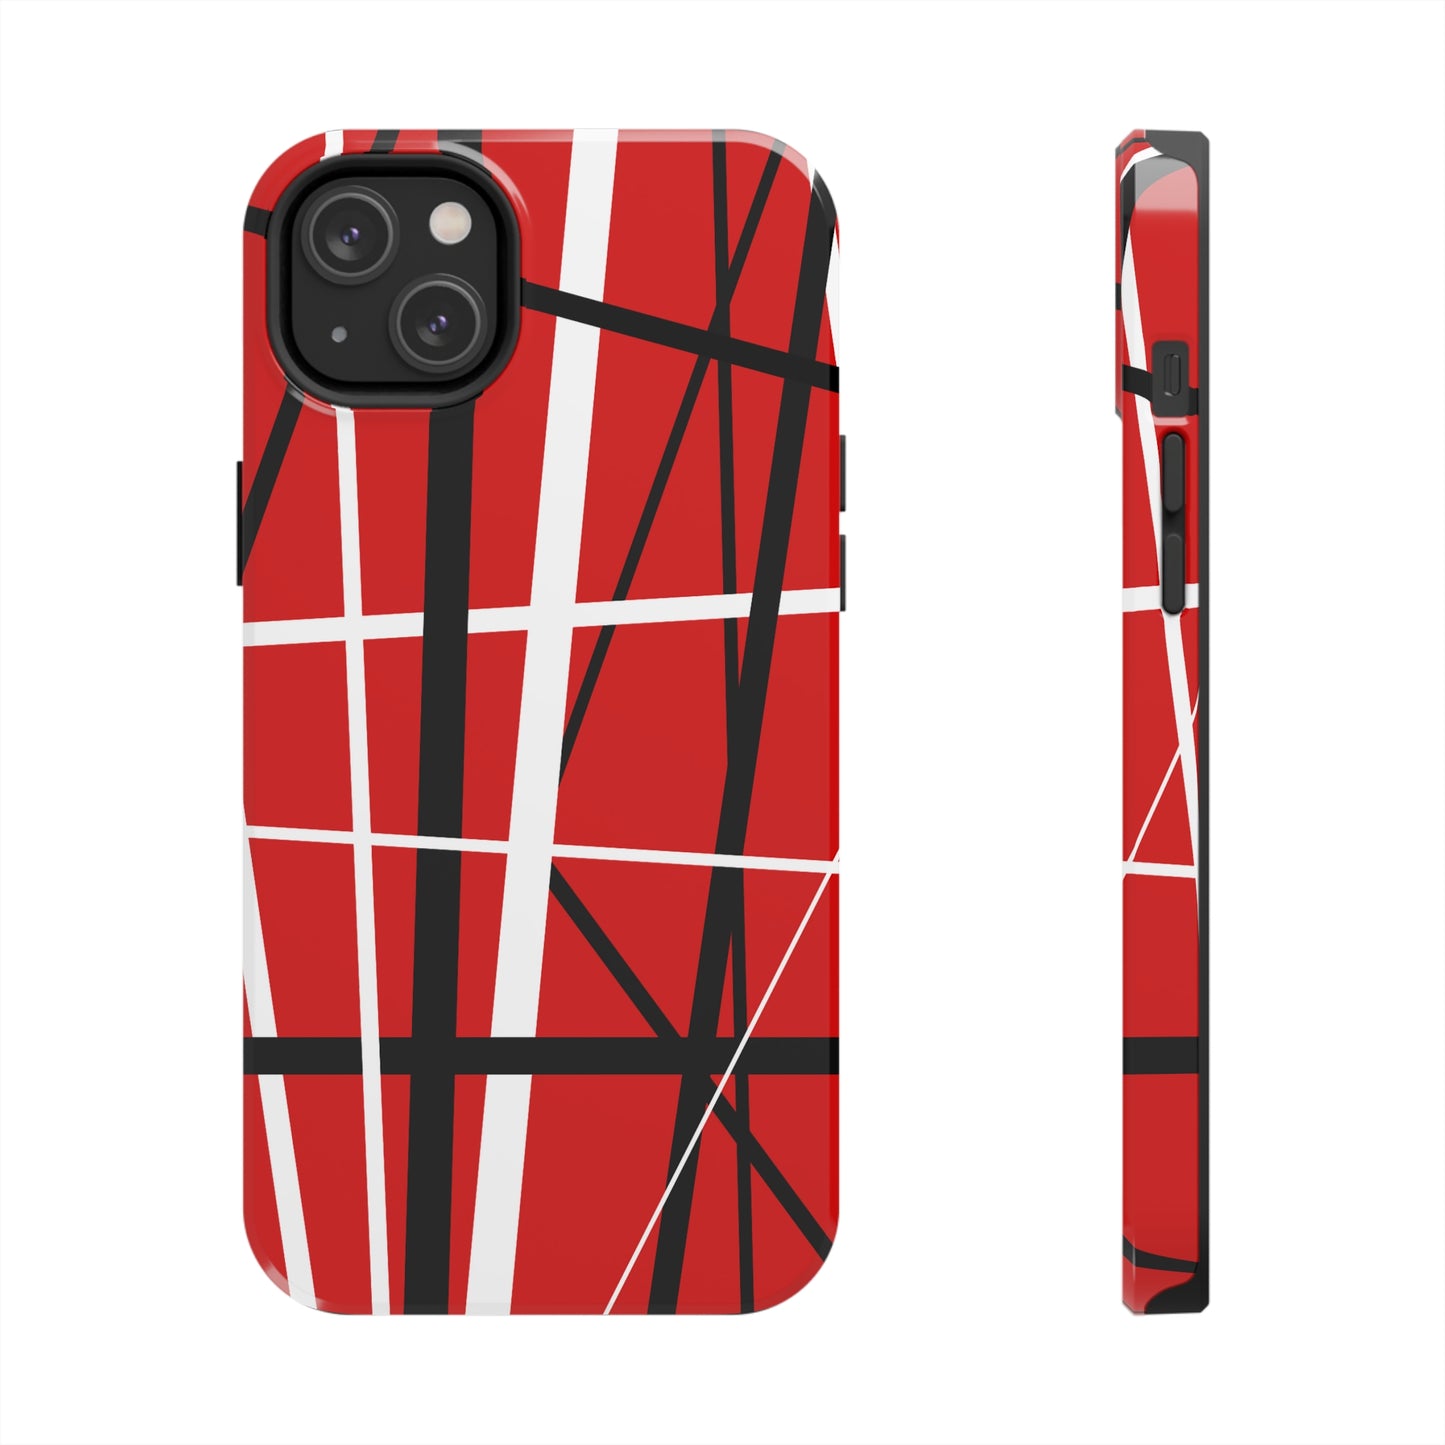 Van Stripes iPhone Case, Running with the Devil